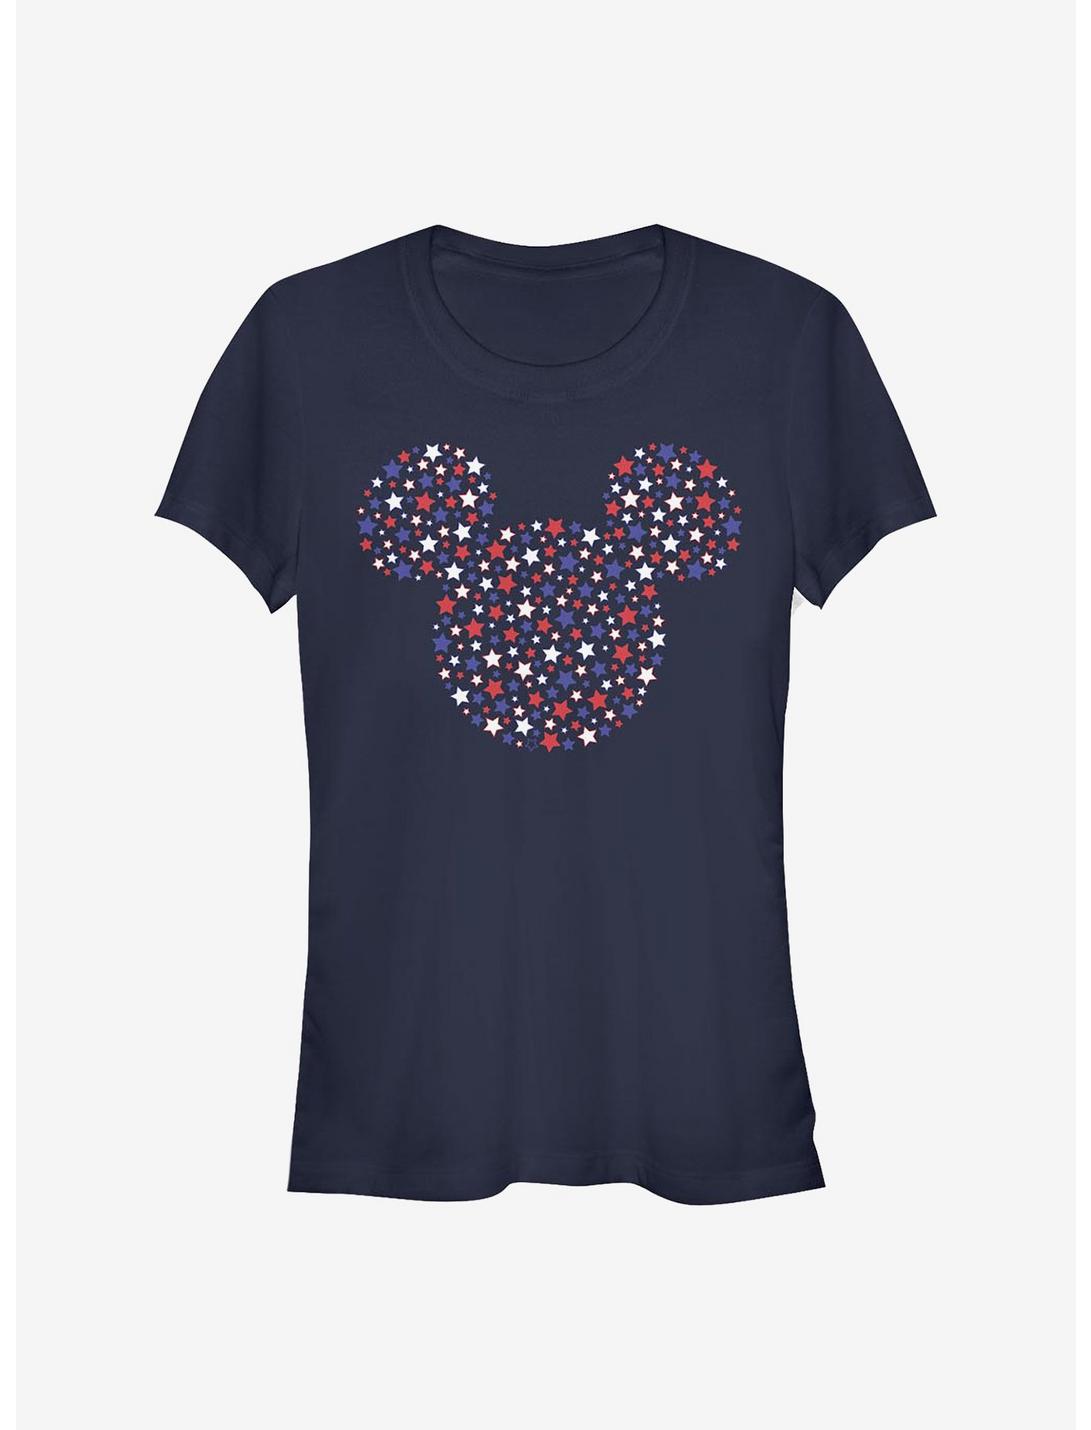 Disney Mickey Mouse Stars And Ears Girls T-Shirt, NAVY, hi-res